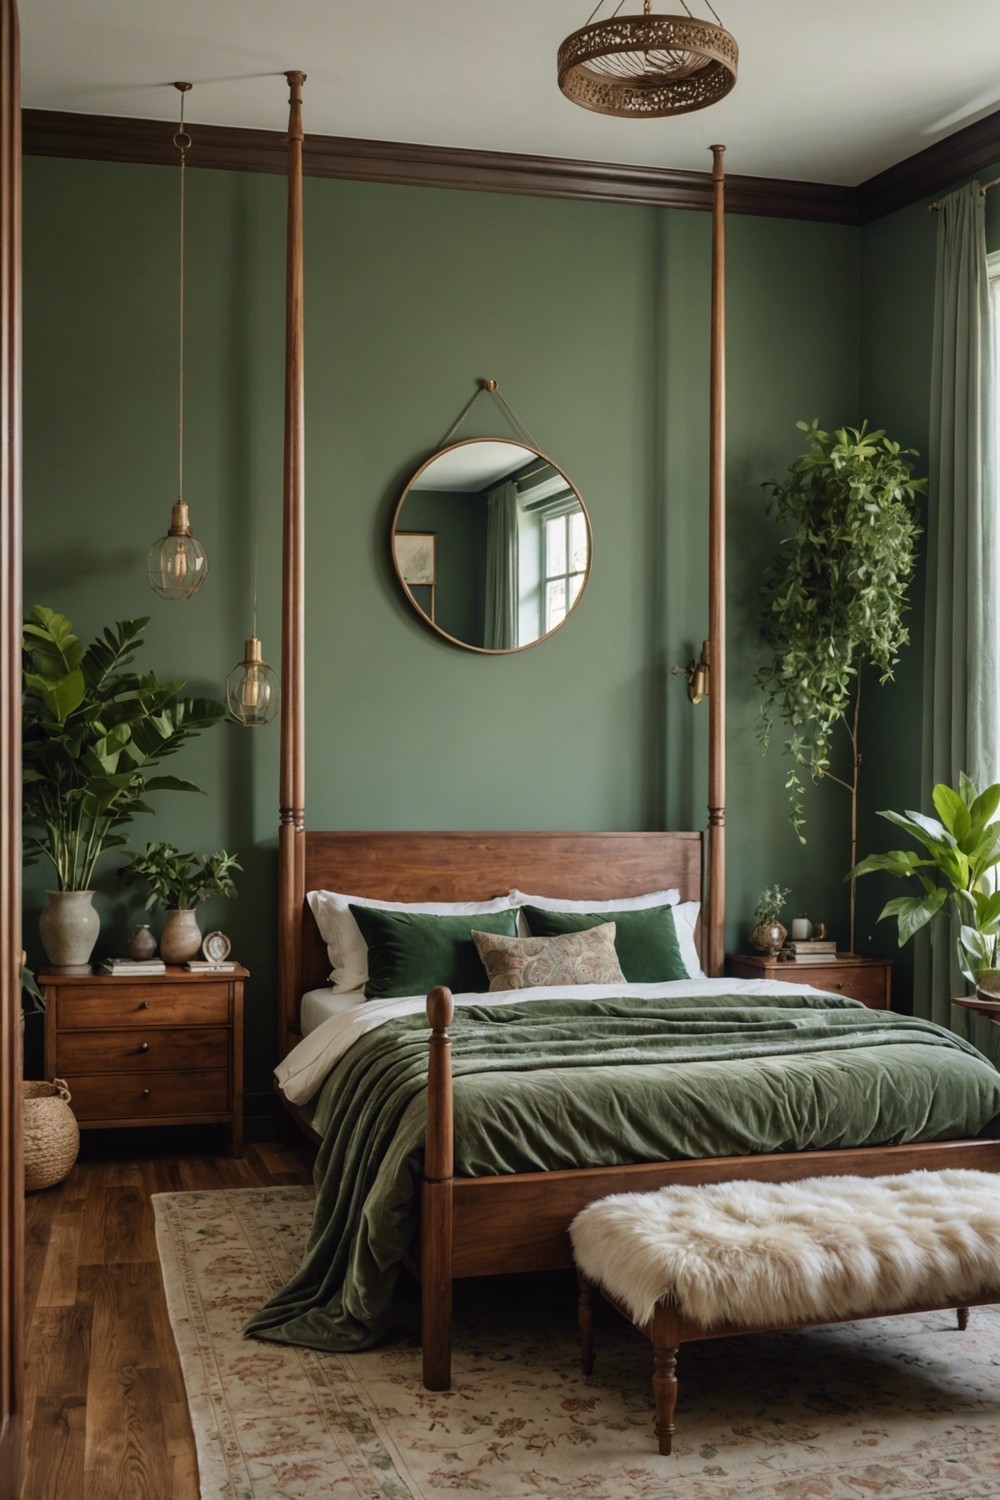 Combine Sage Green with Rich Wood Tones